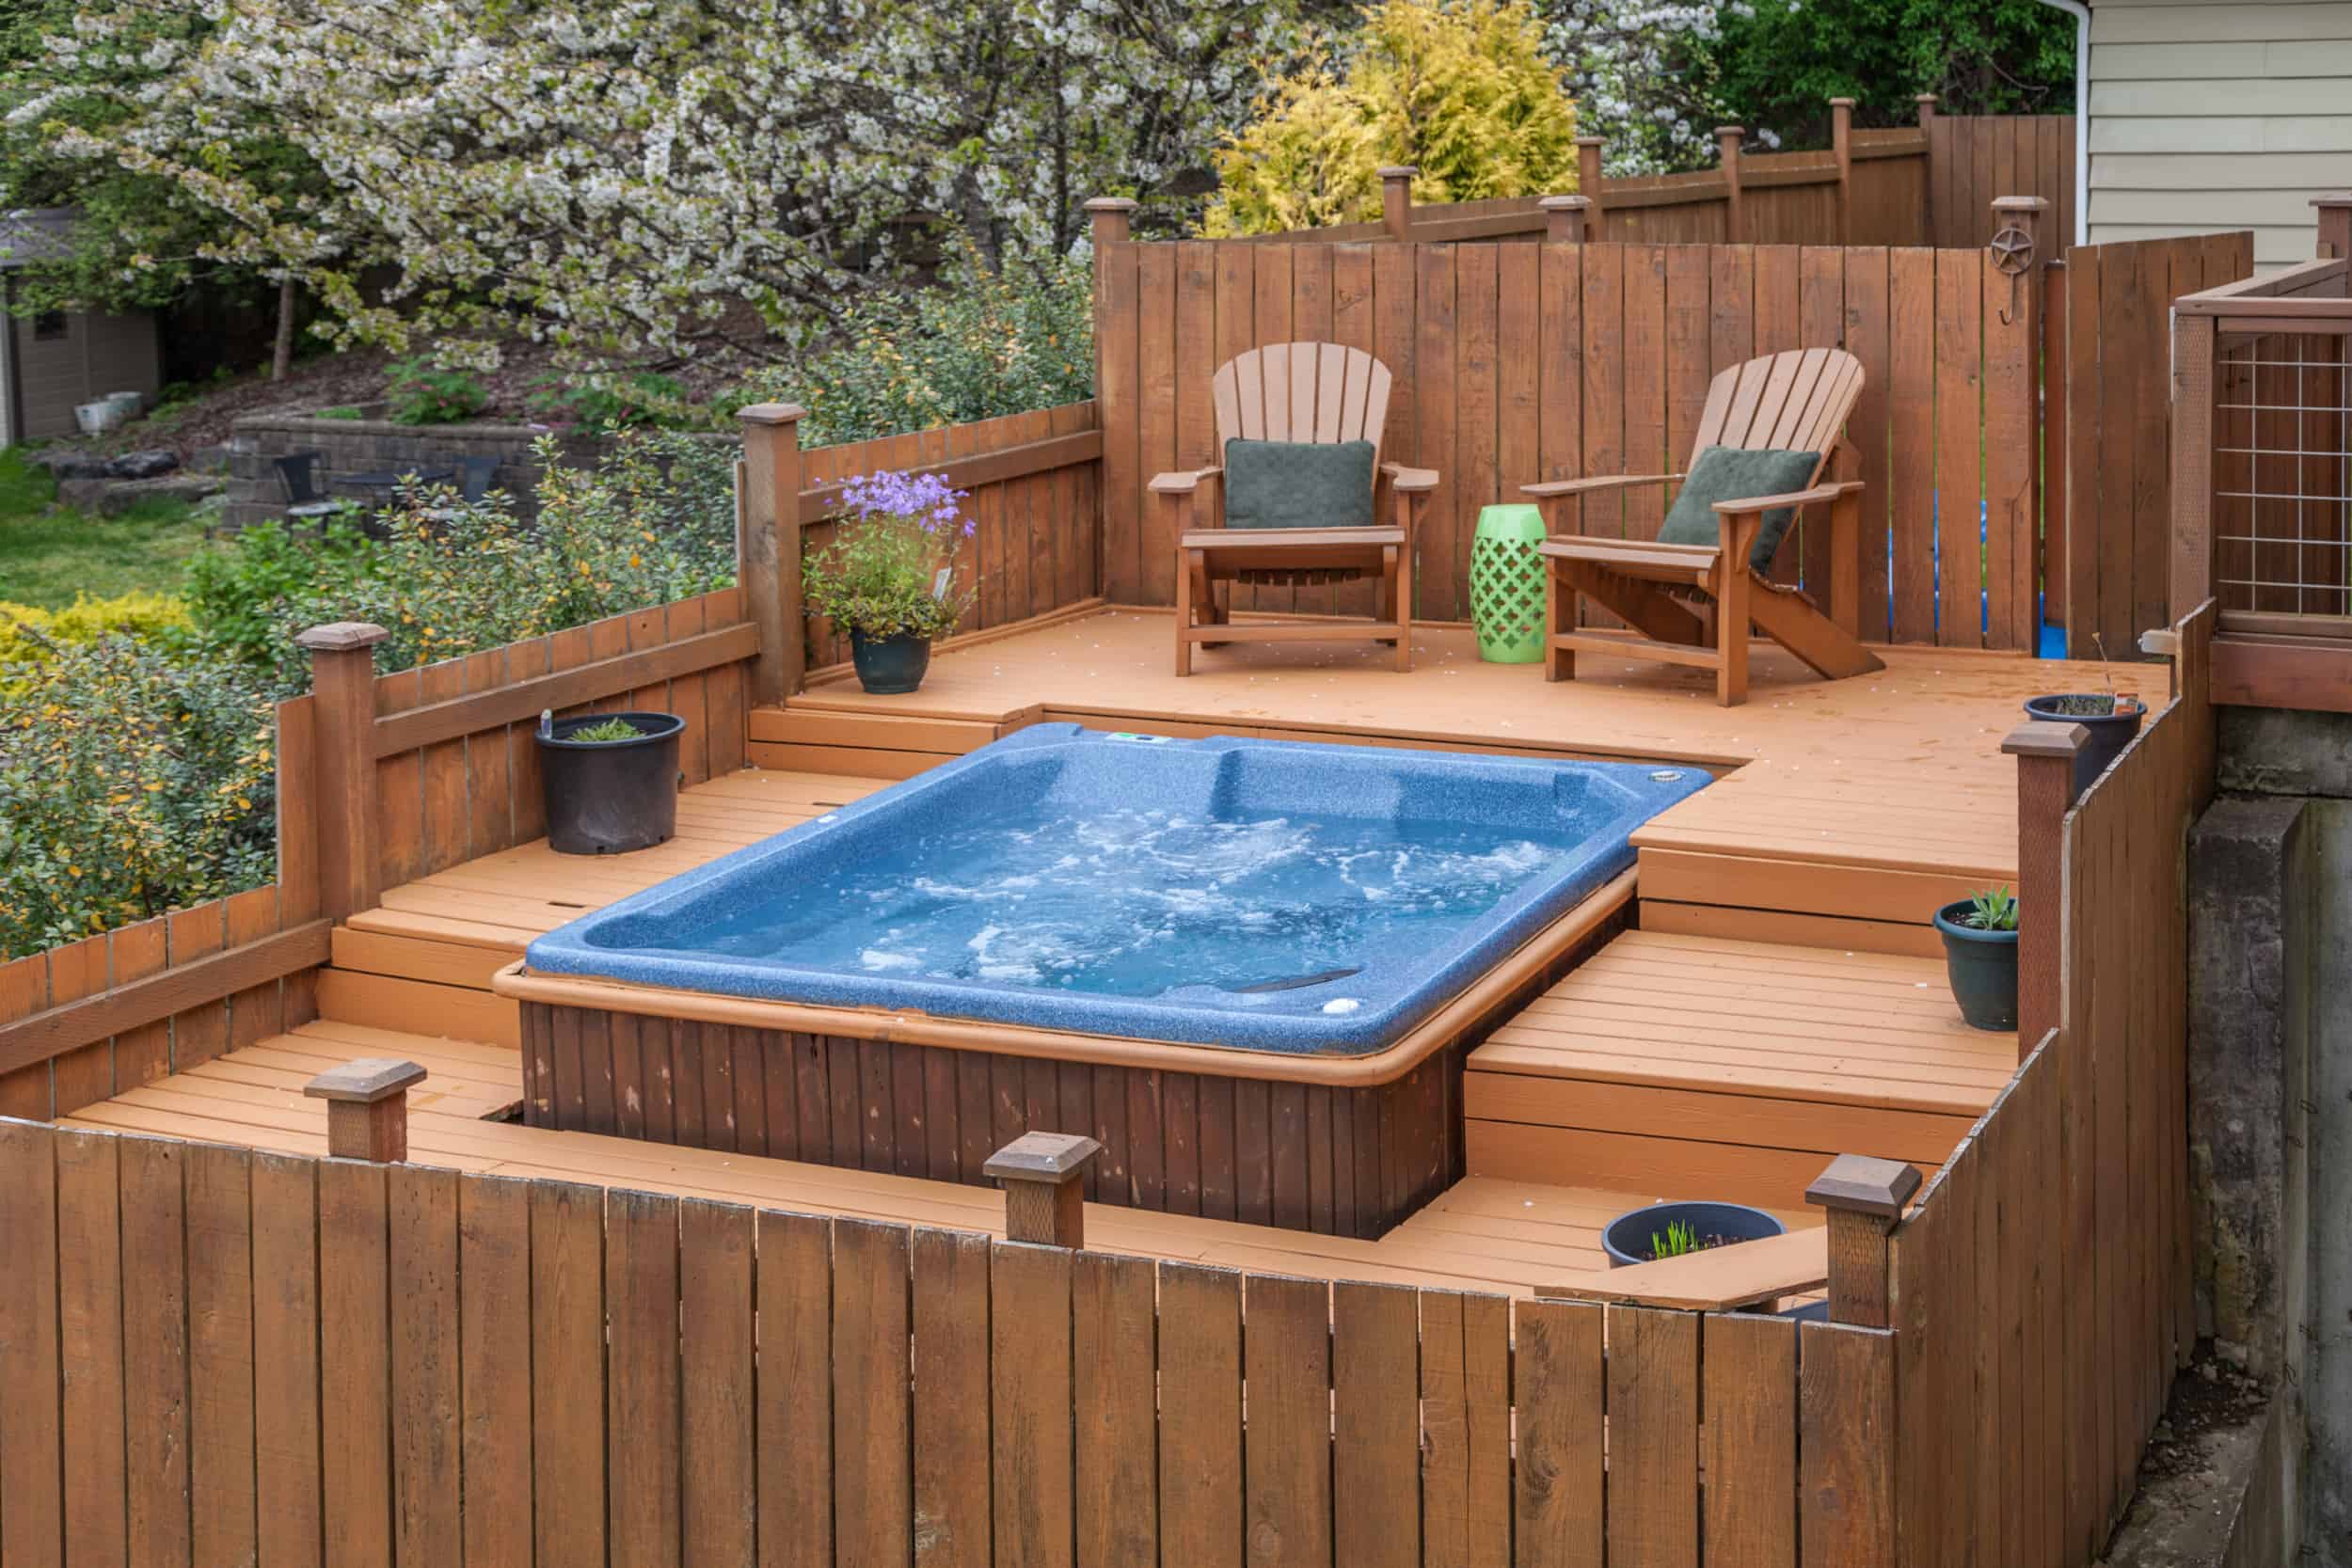 How To Support Deck For Hot Tub